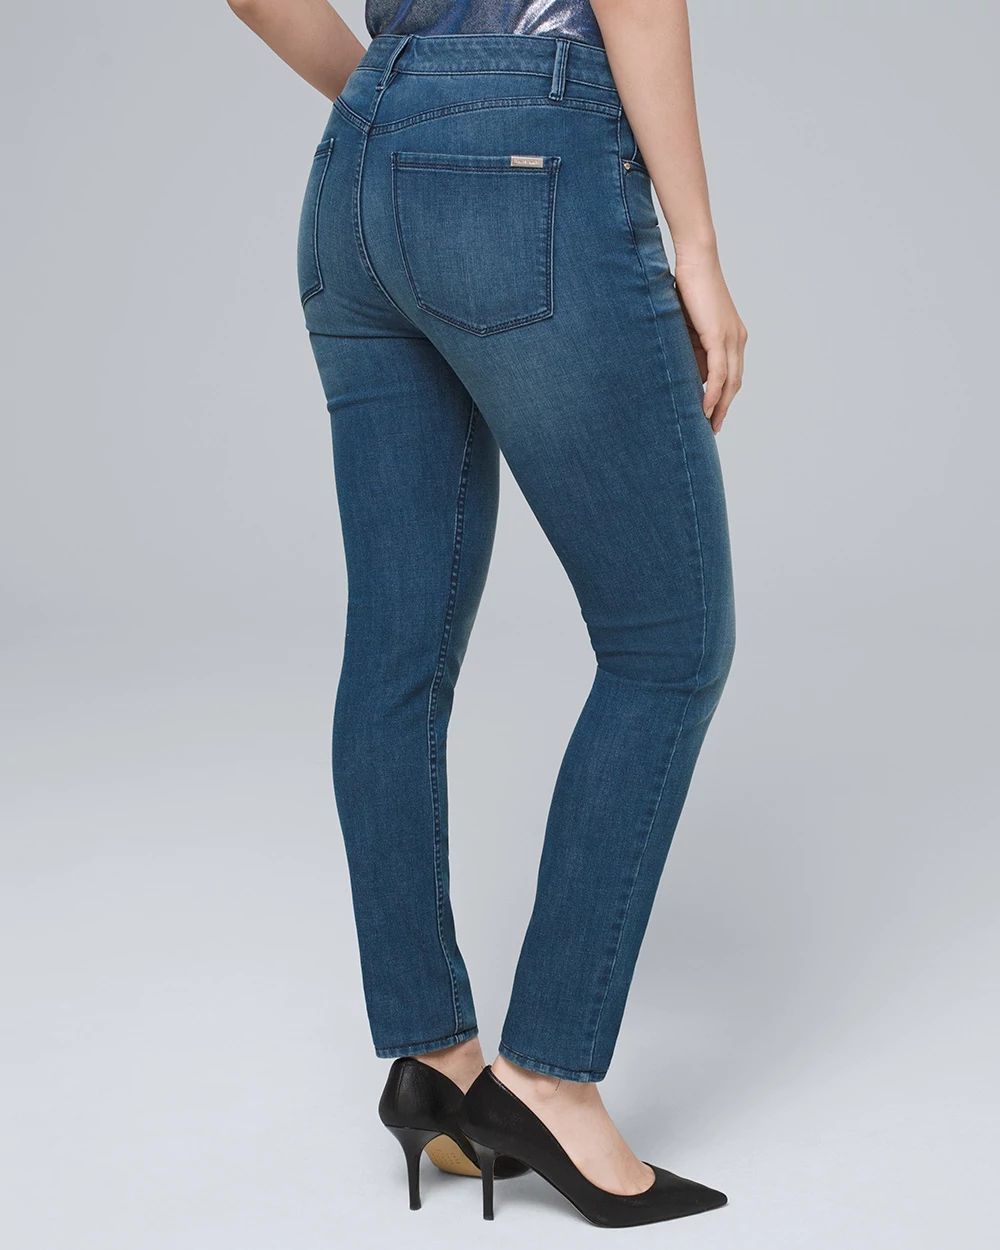 Ultimate Sculpt High-Rise Skinny Ankle Jeans click to view larger image.